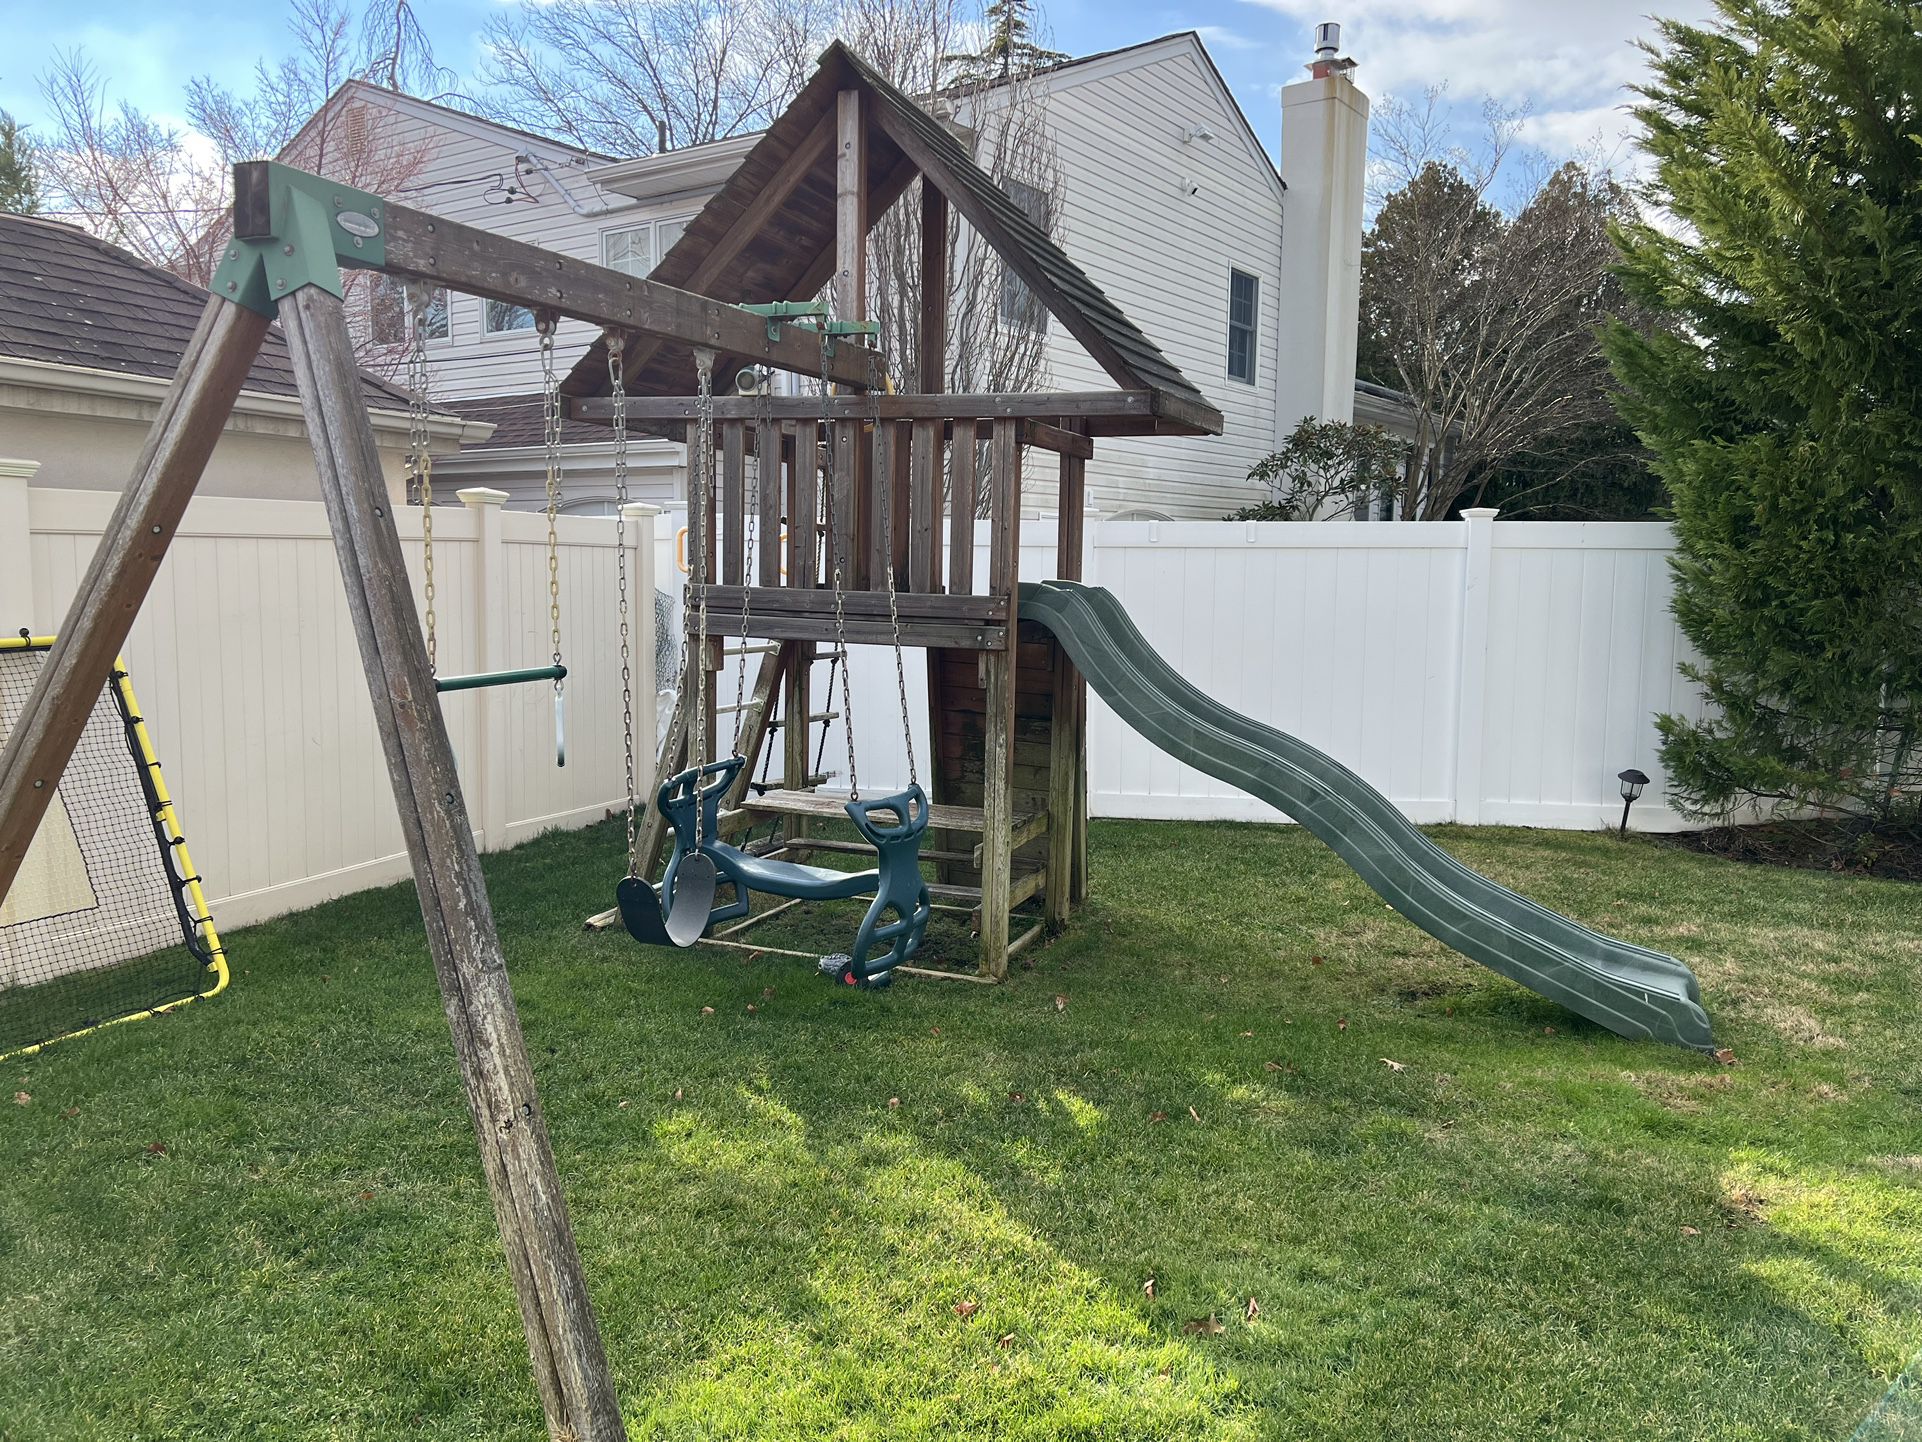 Awesome Swing Set for Sale - Must Go!